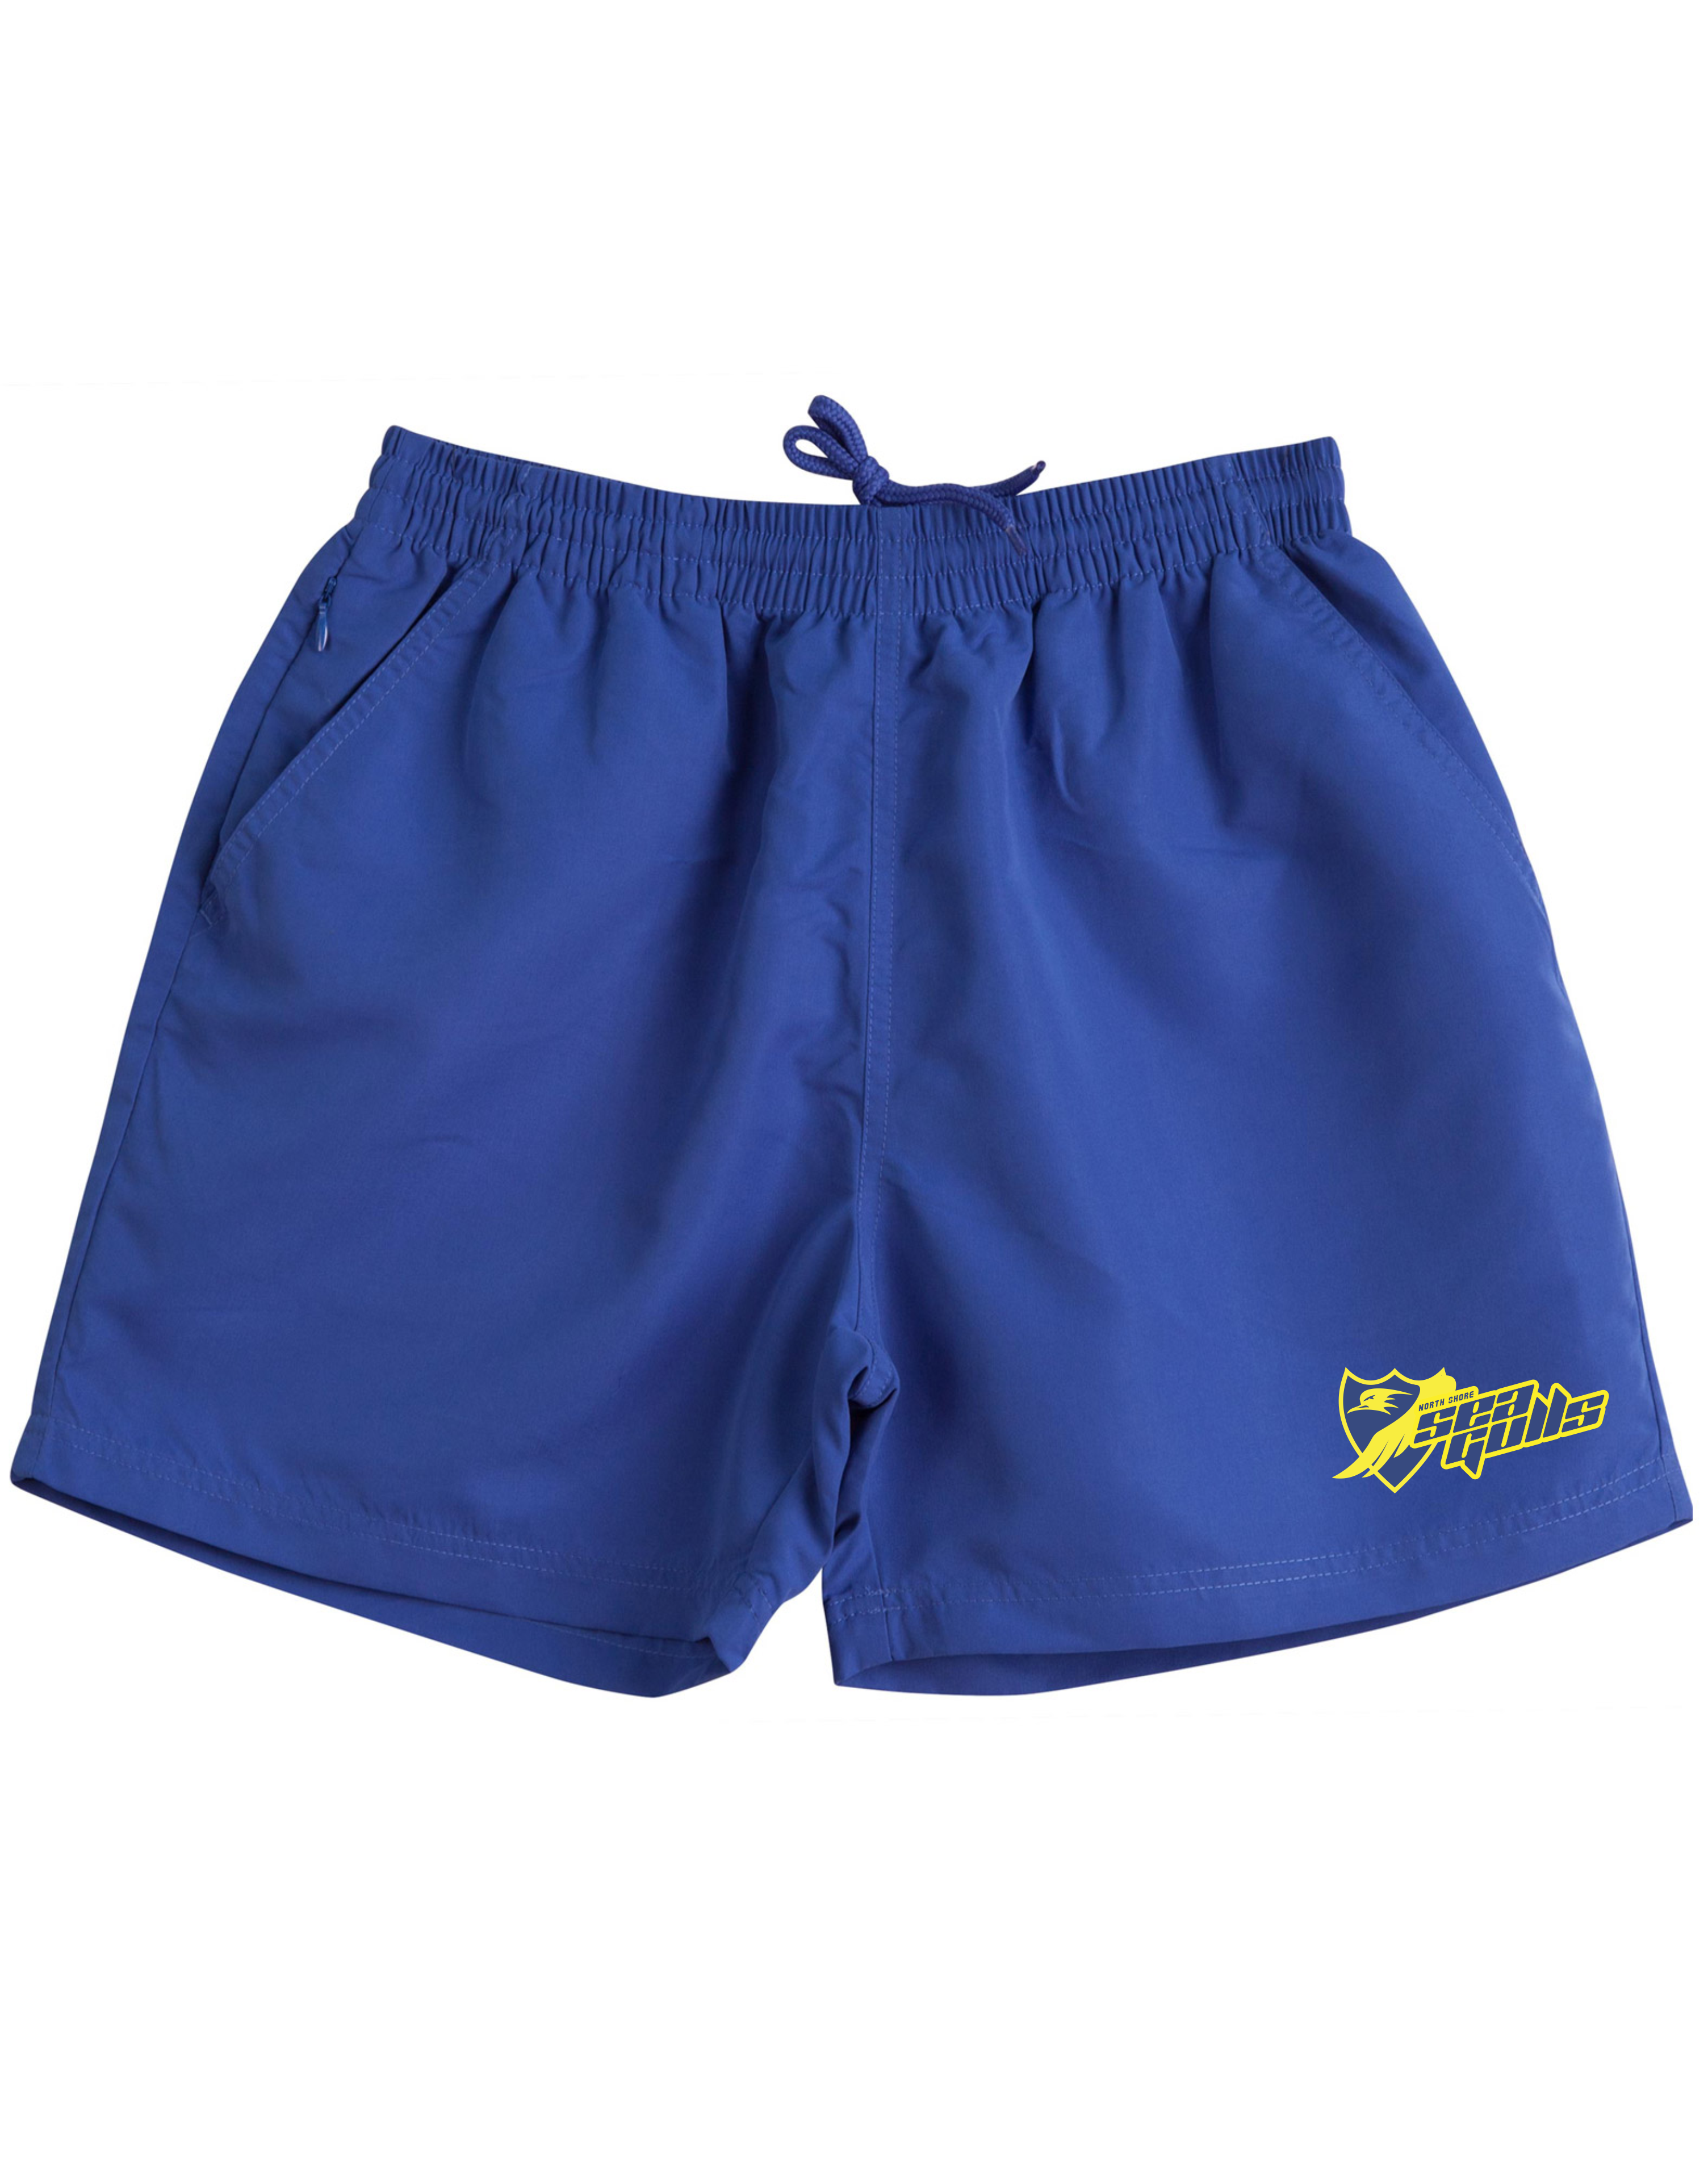 Training Shorts for Kids & Adults